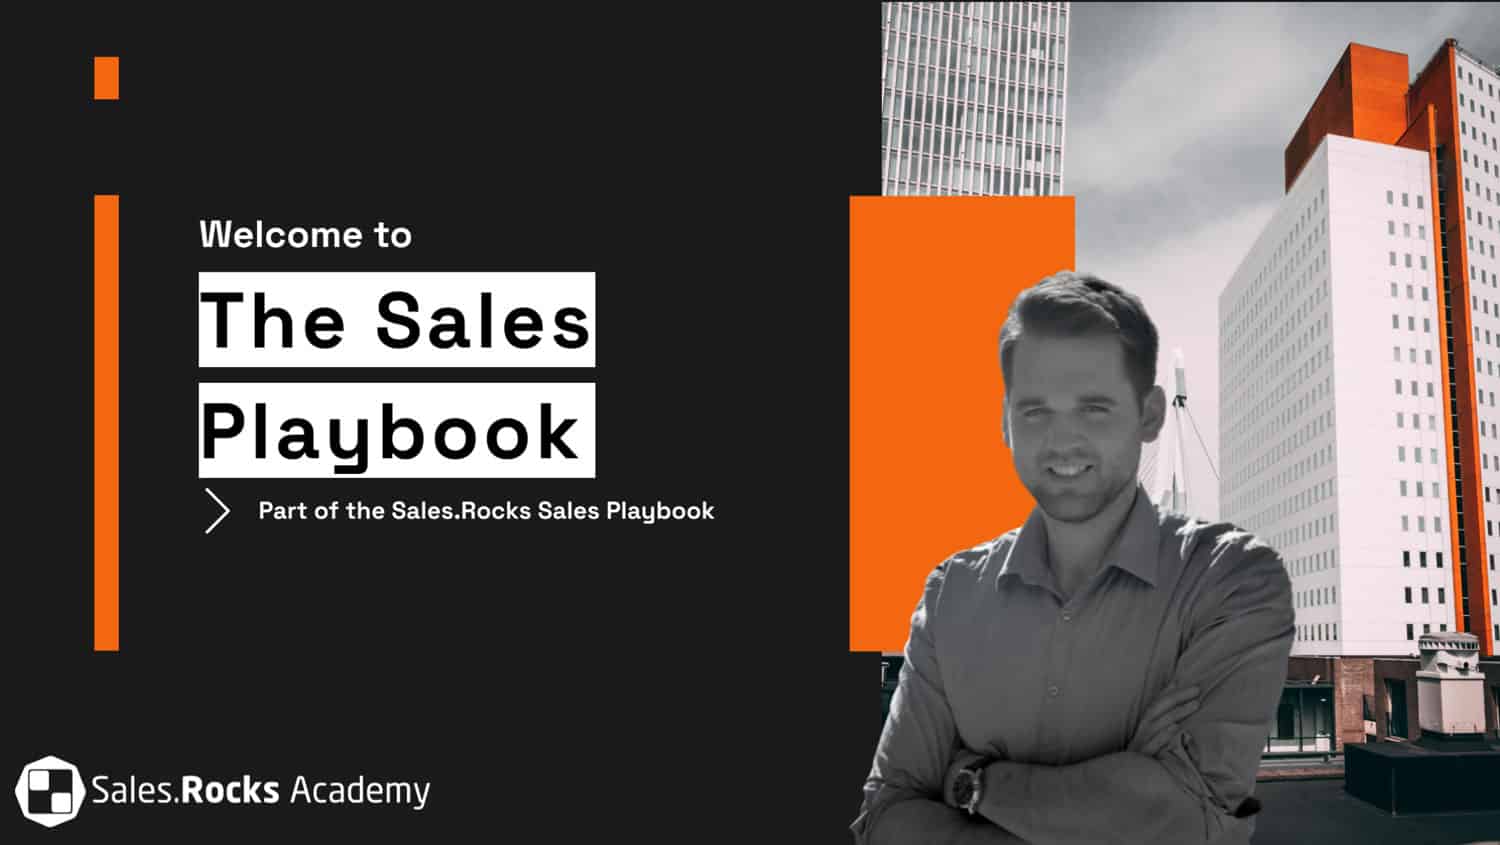 The Sales Playbook - Certified course from Sales.Rocks Academy